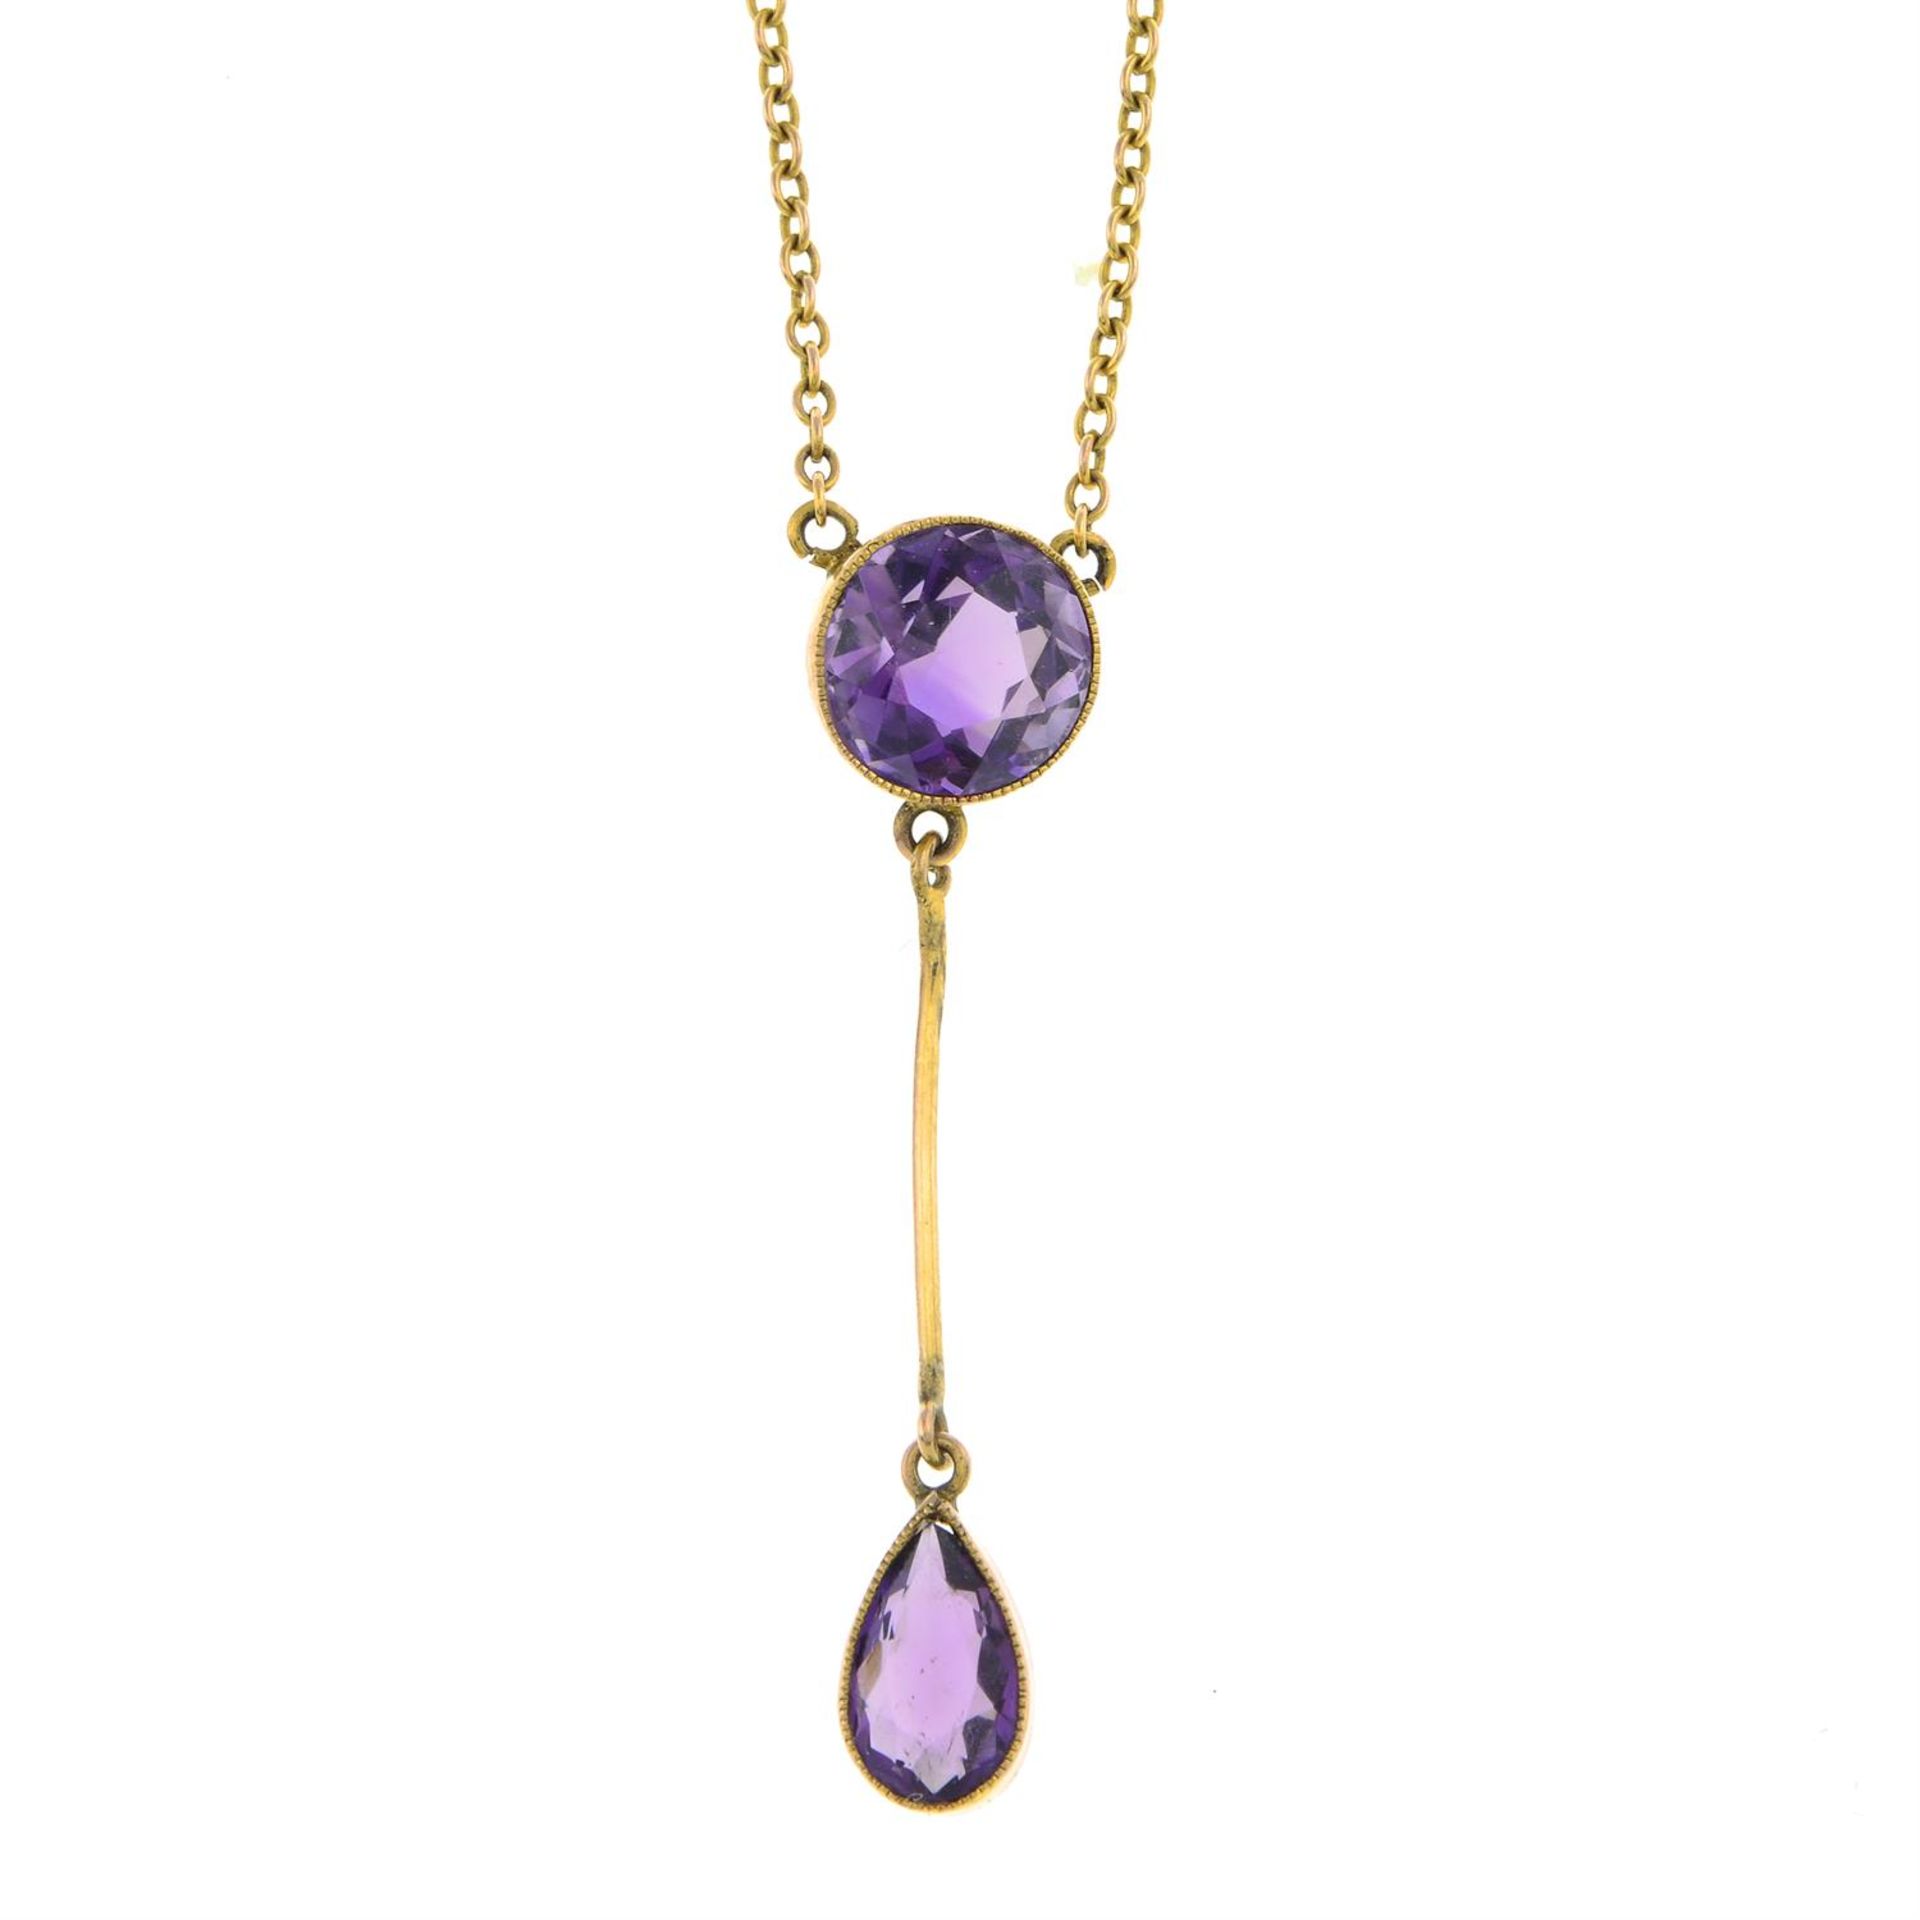 Early 20th century 9ct gold amethyst necklace